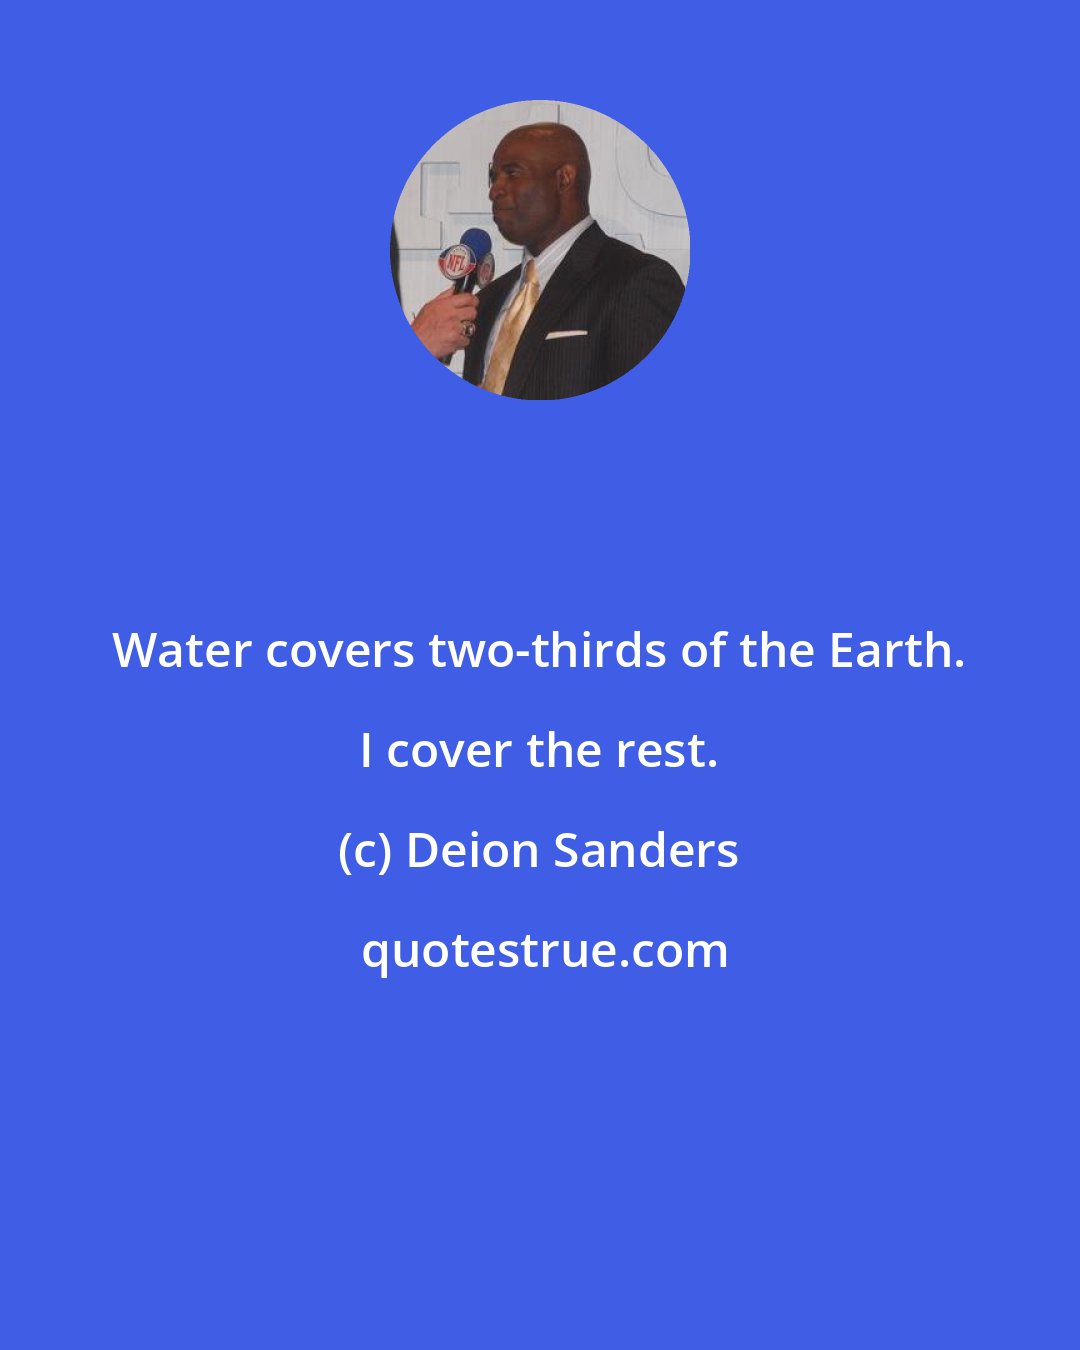 Deion Sanders: Water covers two-thirds of the Earth. I cover the rest.